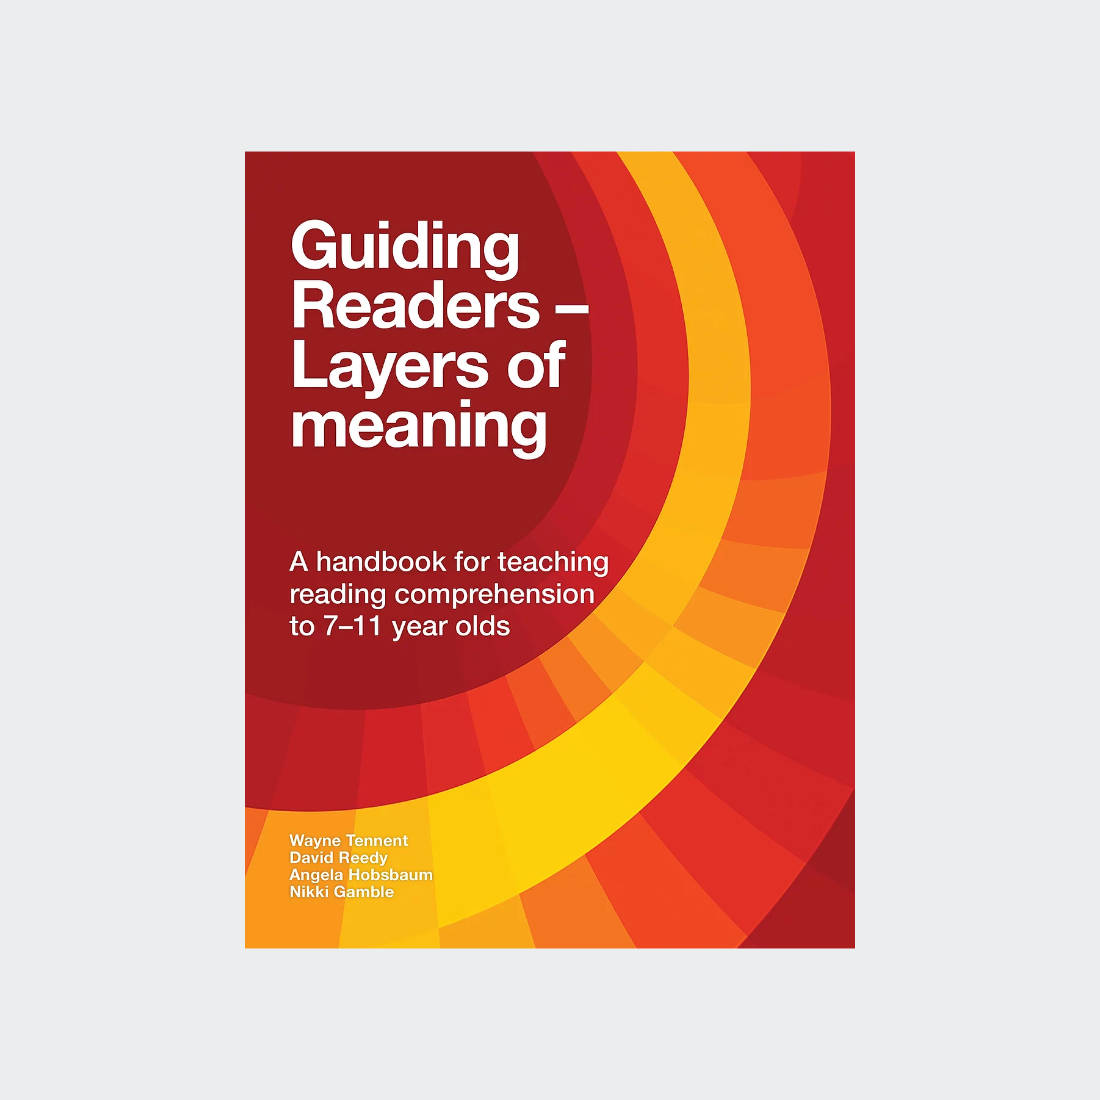 Guiding Readers - Layers of Meaning